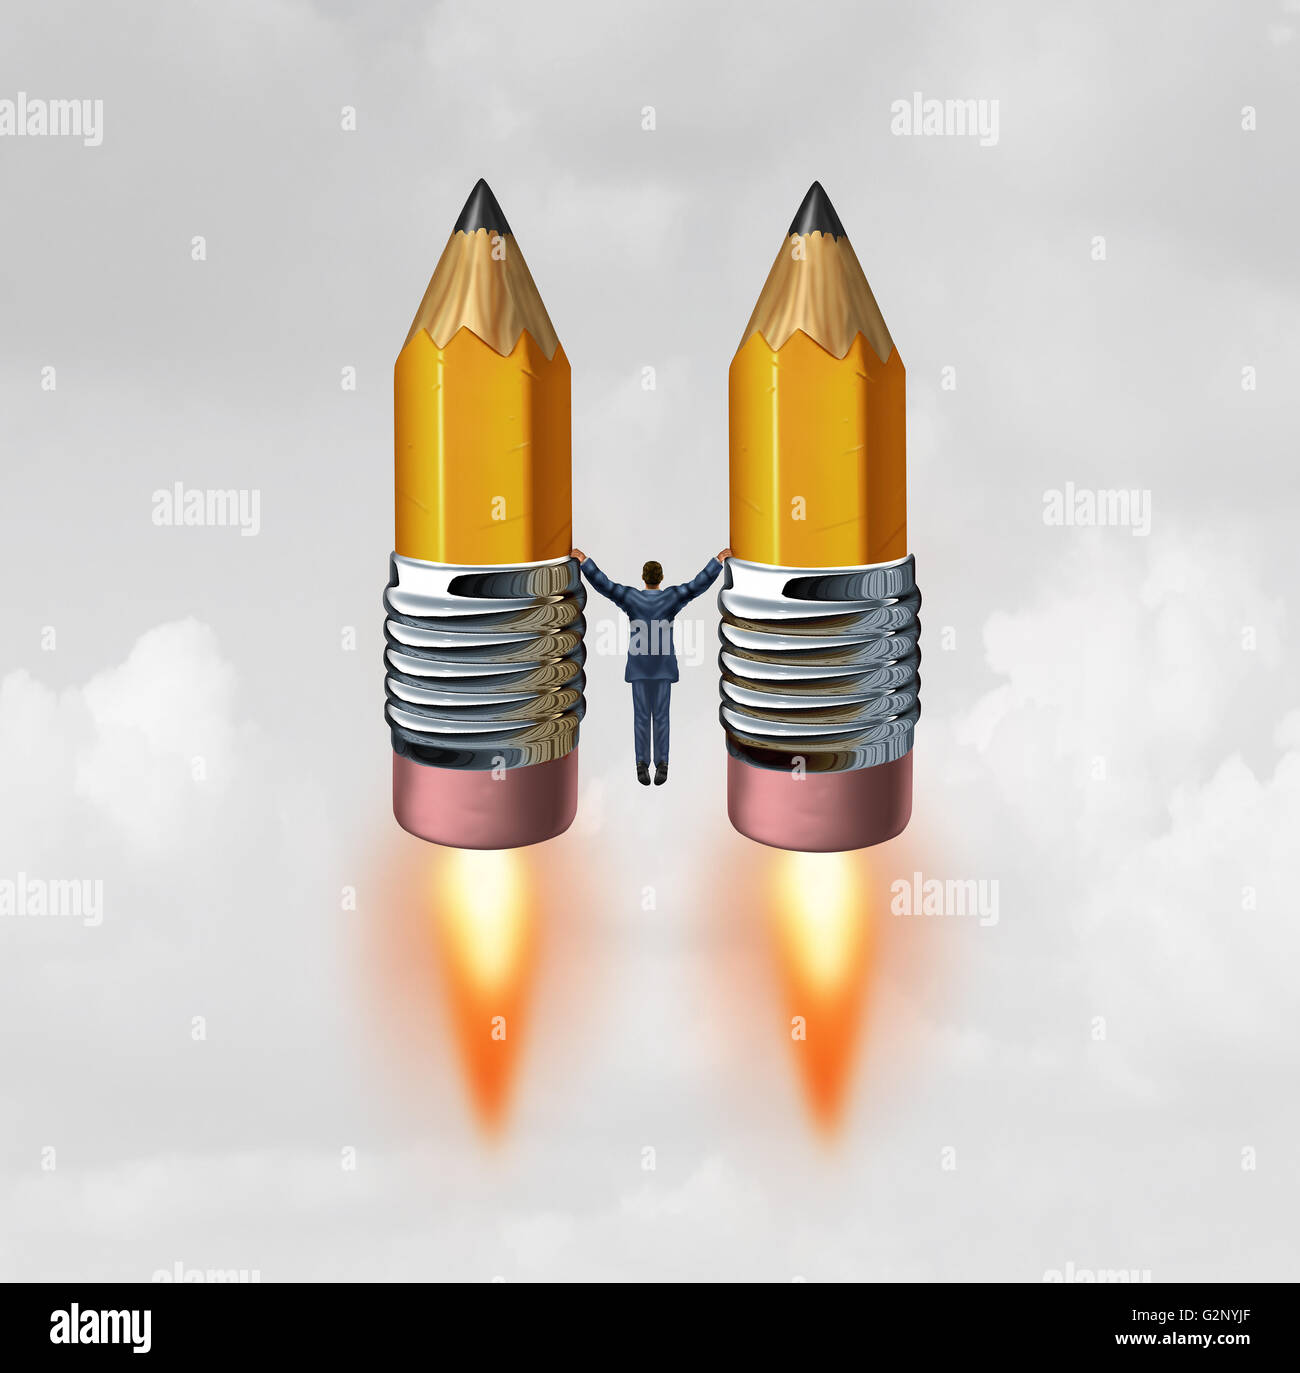 Business creative rocket concept as a businessman holding two pencils with rocket engine flames blasting off upwards towards success with 3D illustration elements. Stock Photo